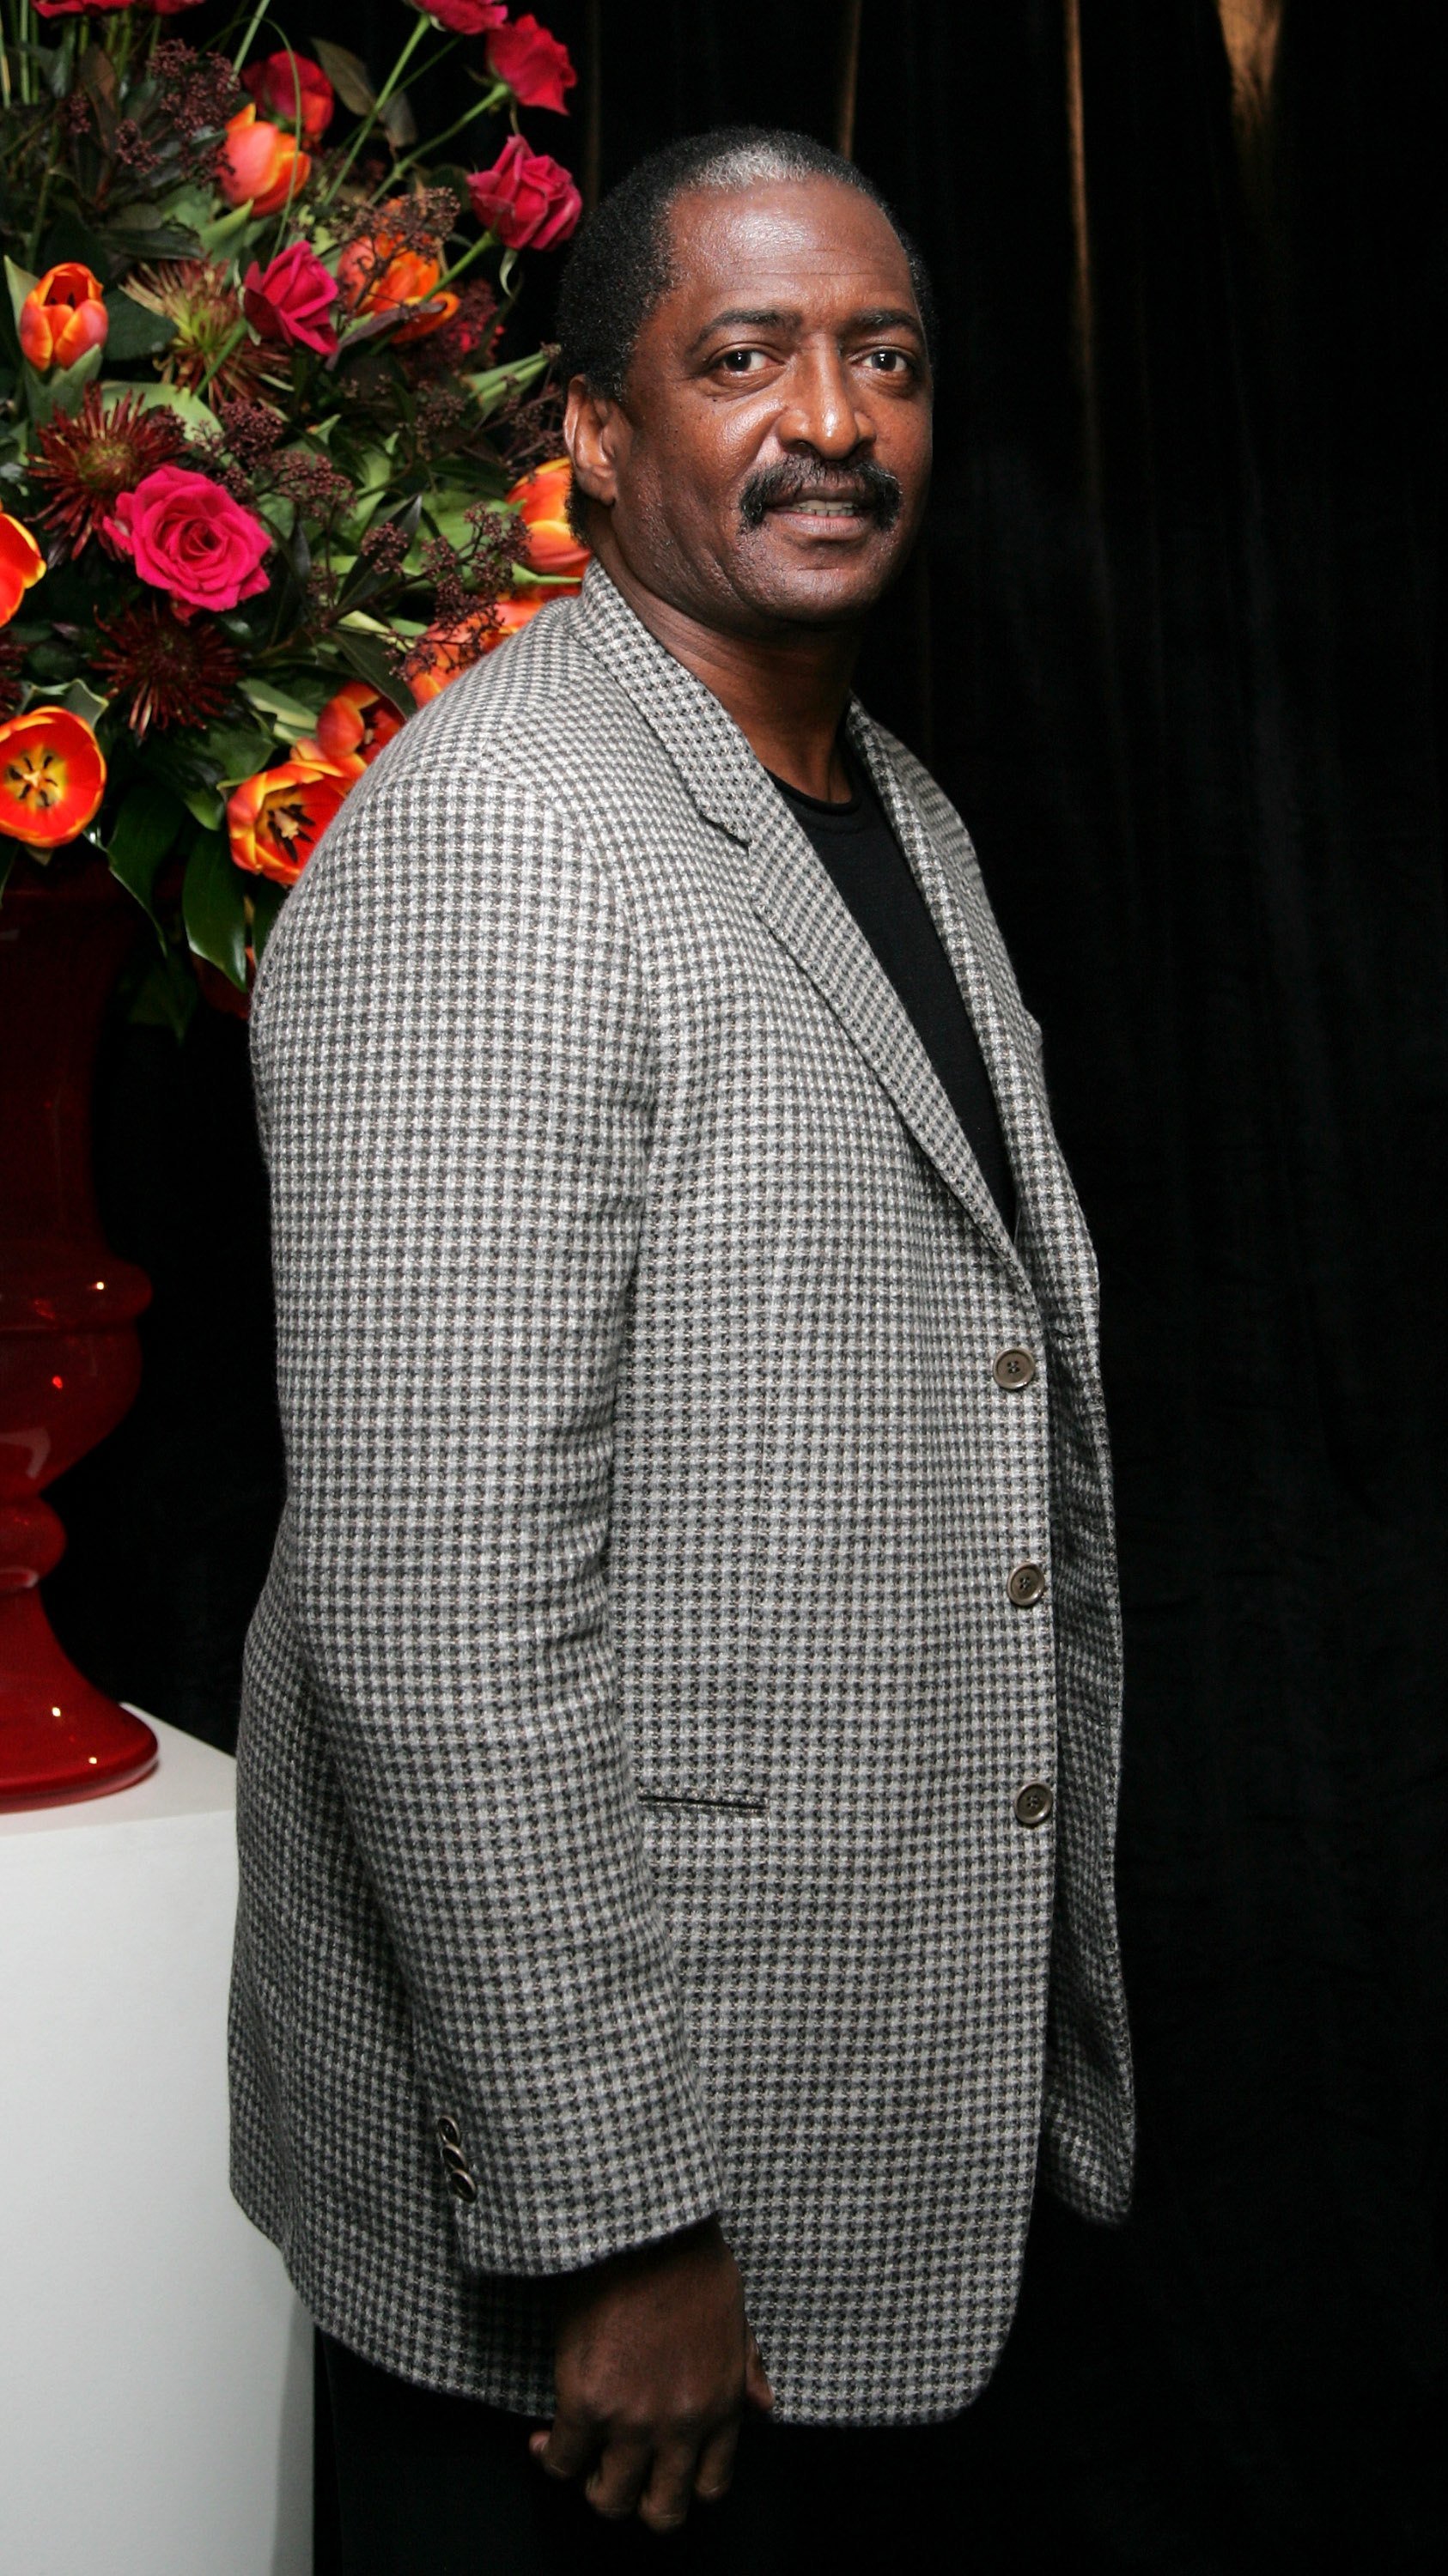 Matthew Knowles, arrives at the after party following the UK premiere of "Dreamgirls" at the Hayward Gallery on January 21, 2007 | Photo: GettyImages